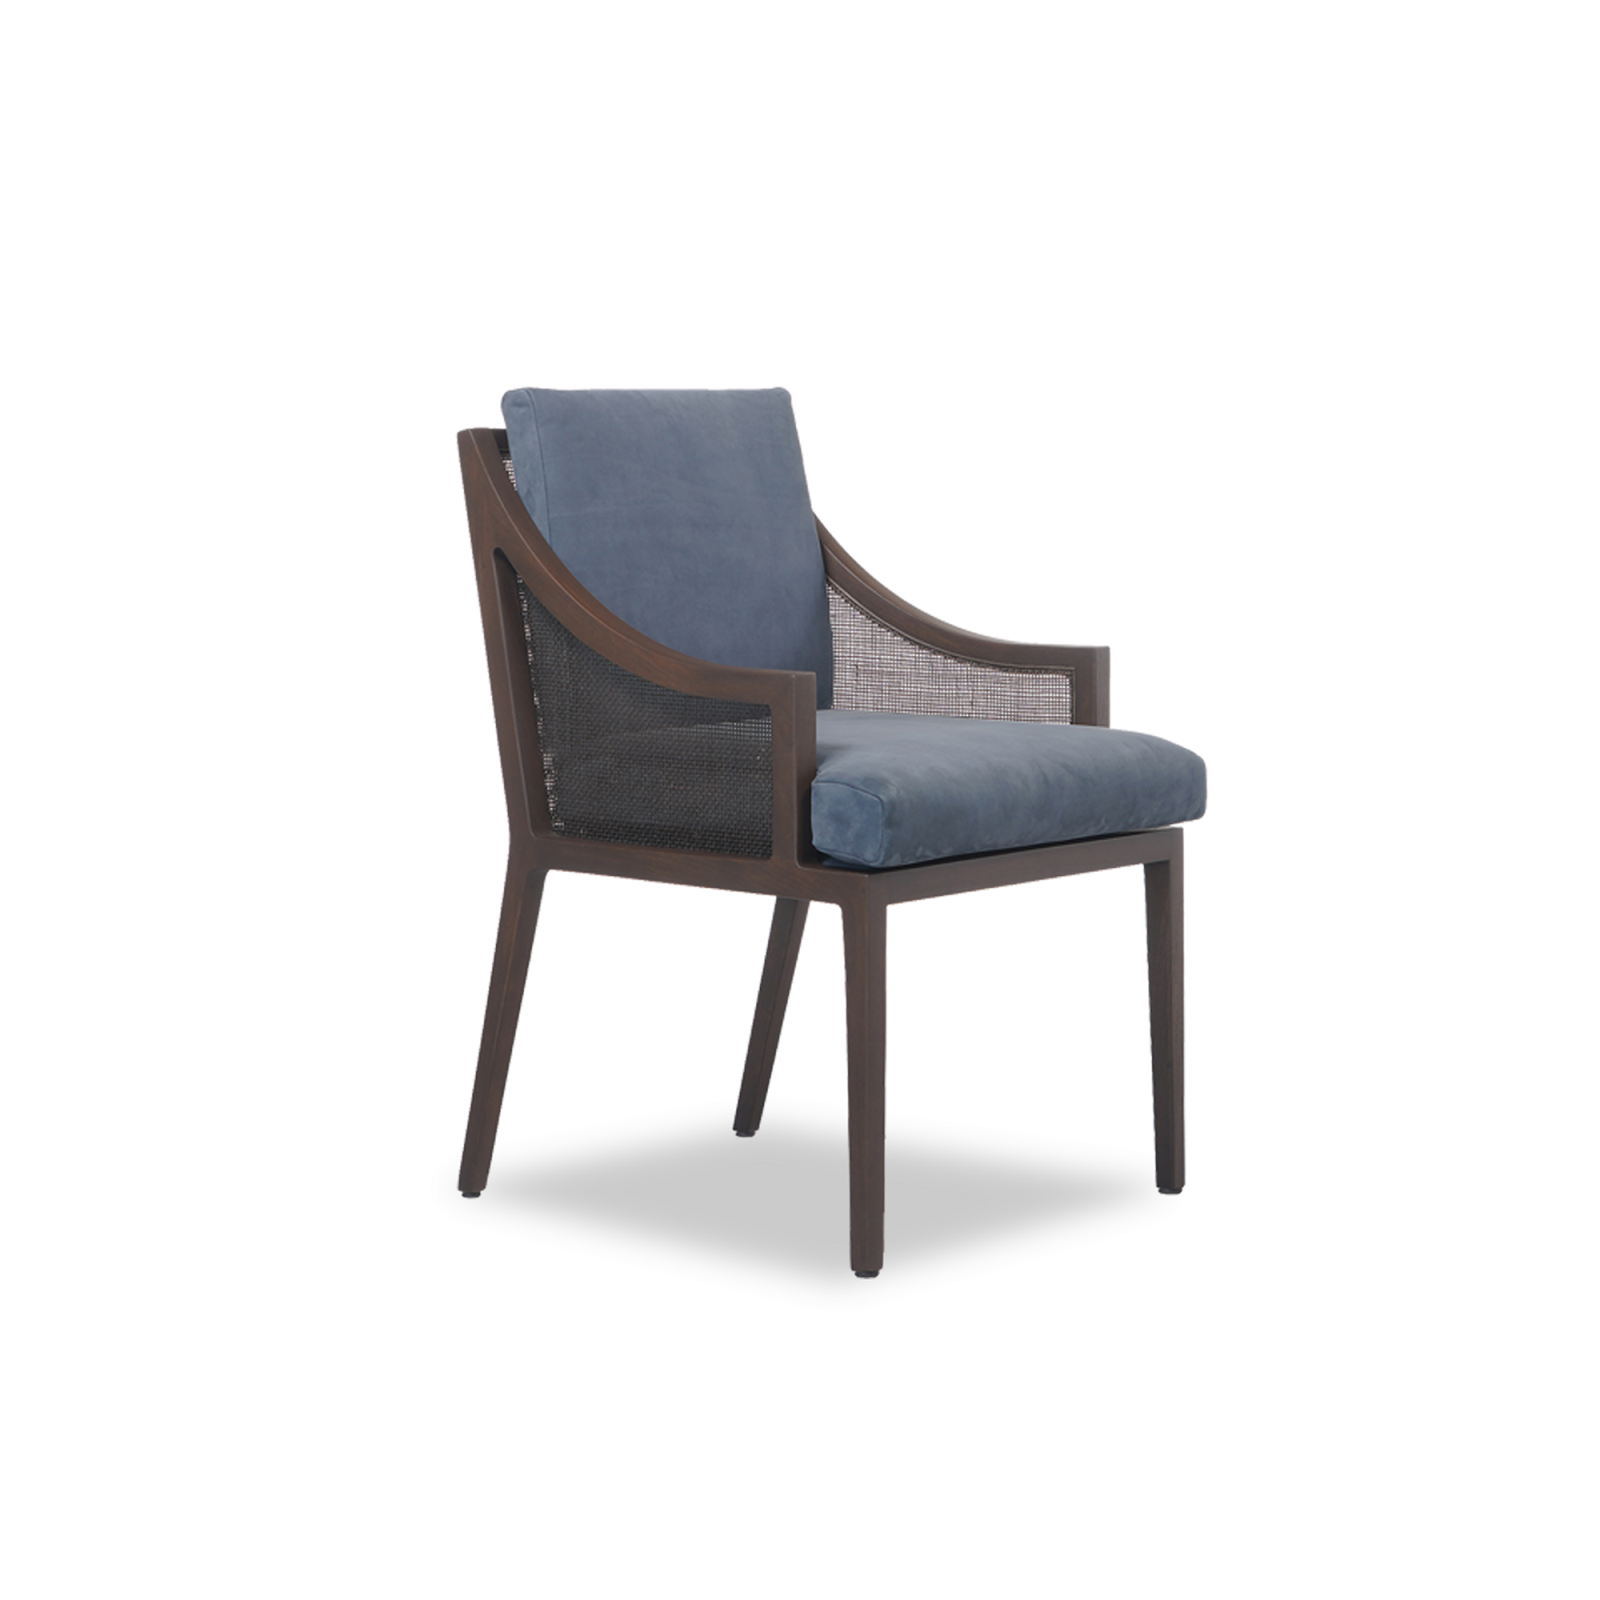 Toulouse chair with blue upholstery and brown wooden legs.